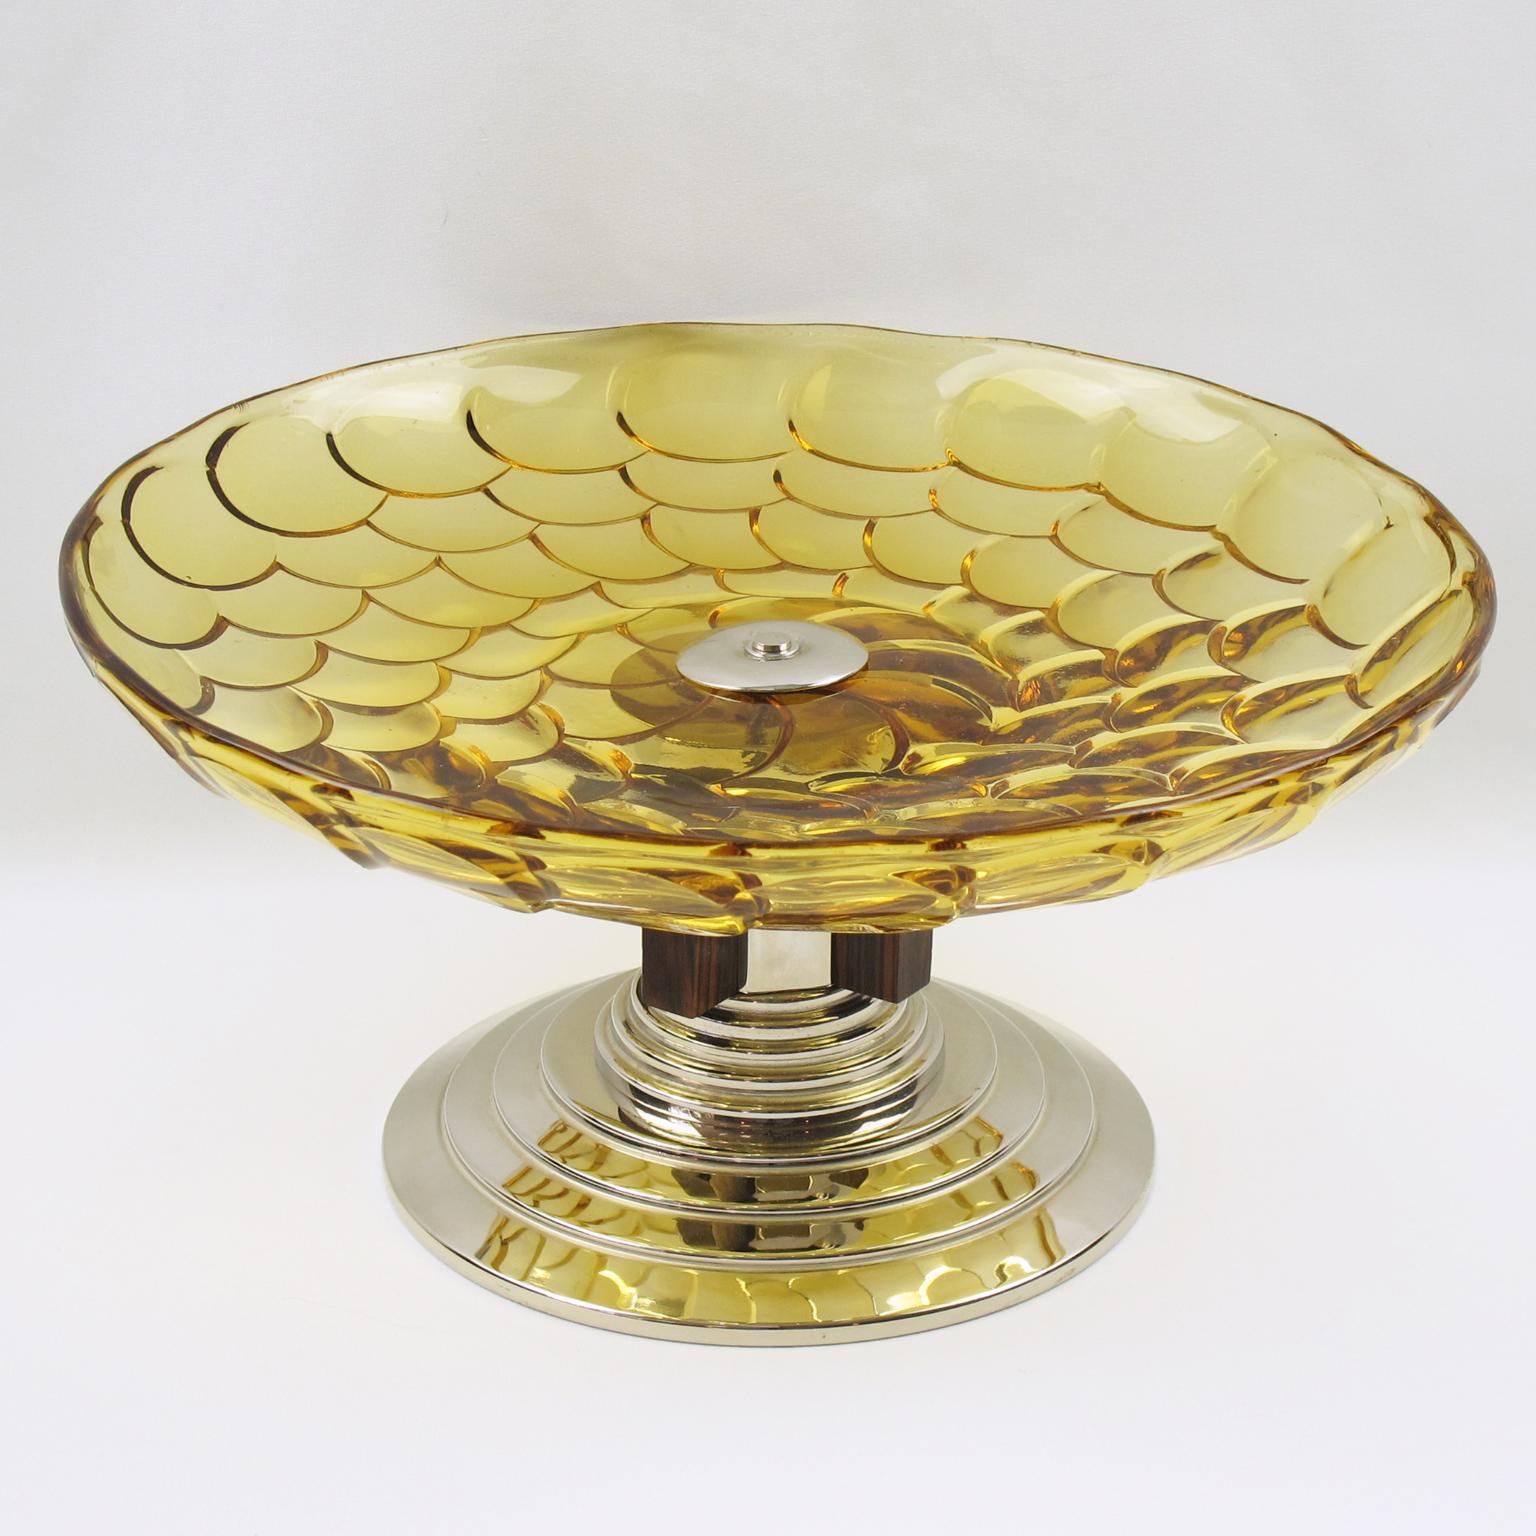 Very stylish French Art Deco modernist centerpiece or bowl. Large round glass bowl with tortoiseshell molded pattern in lovely bright yellow marigold color. Pedestal base in chromed metal and Macassar wood with unique asymmetric skyscraper pattern.